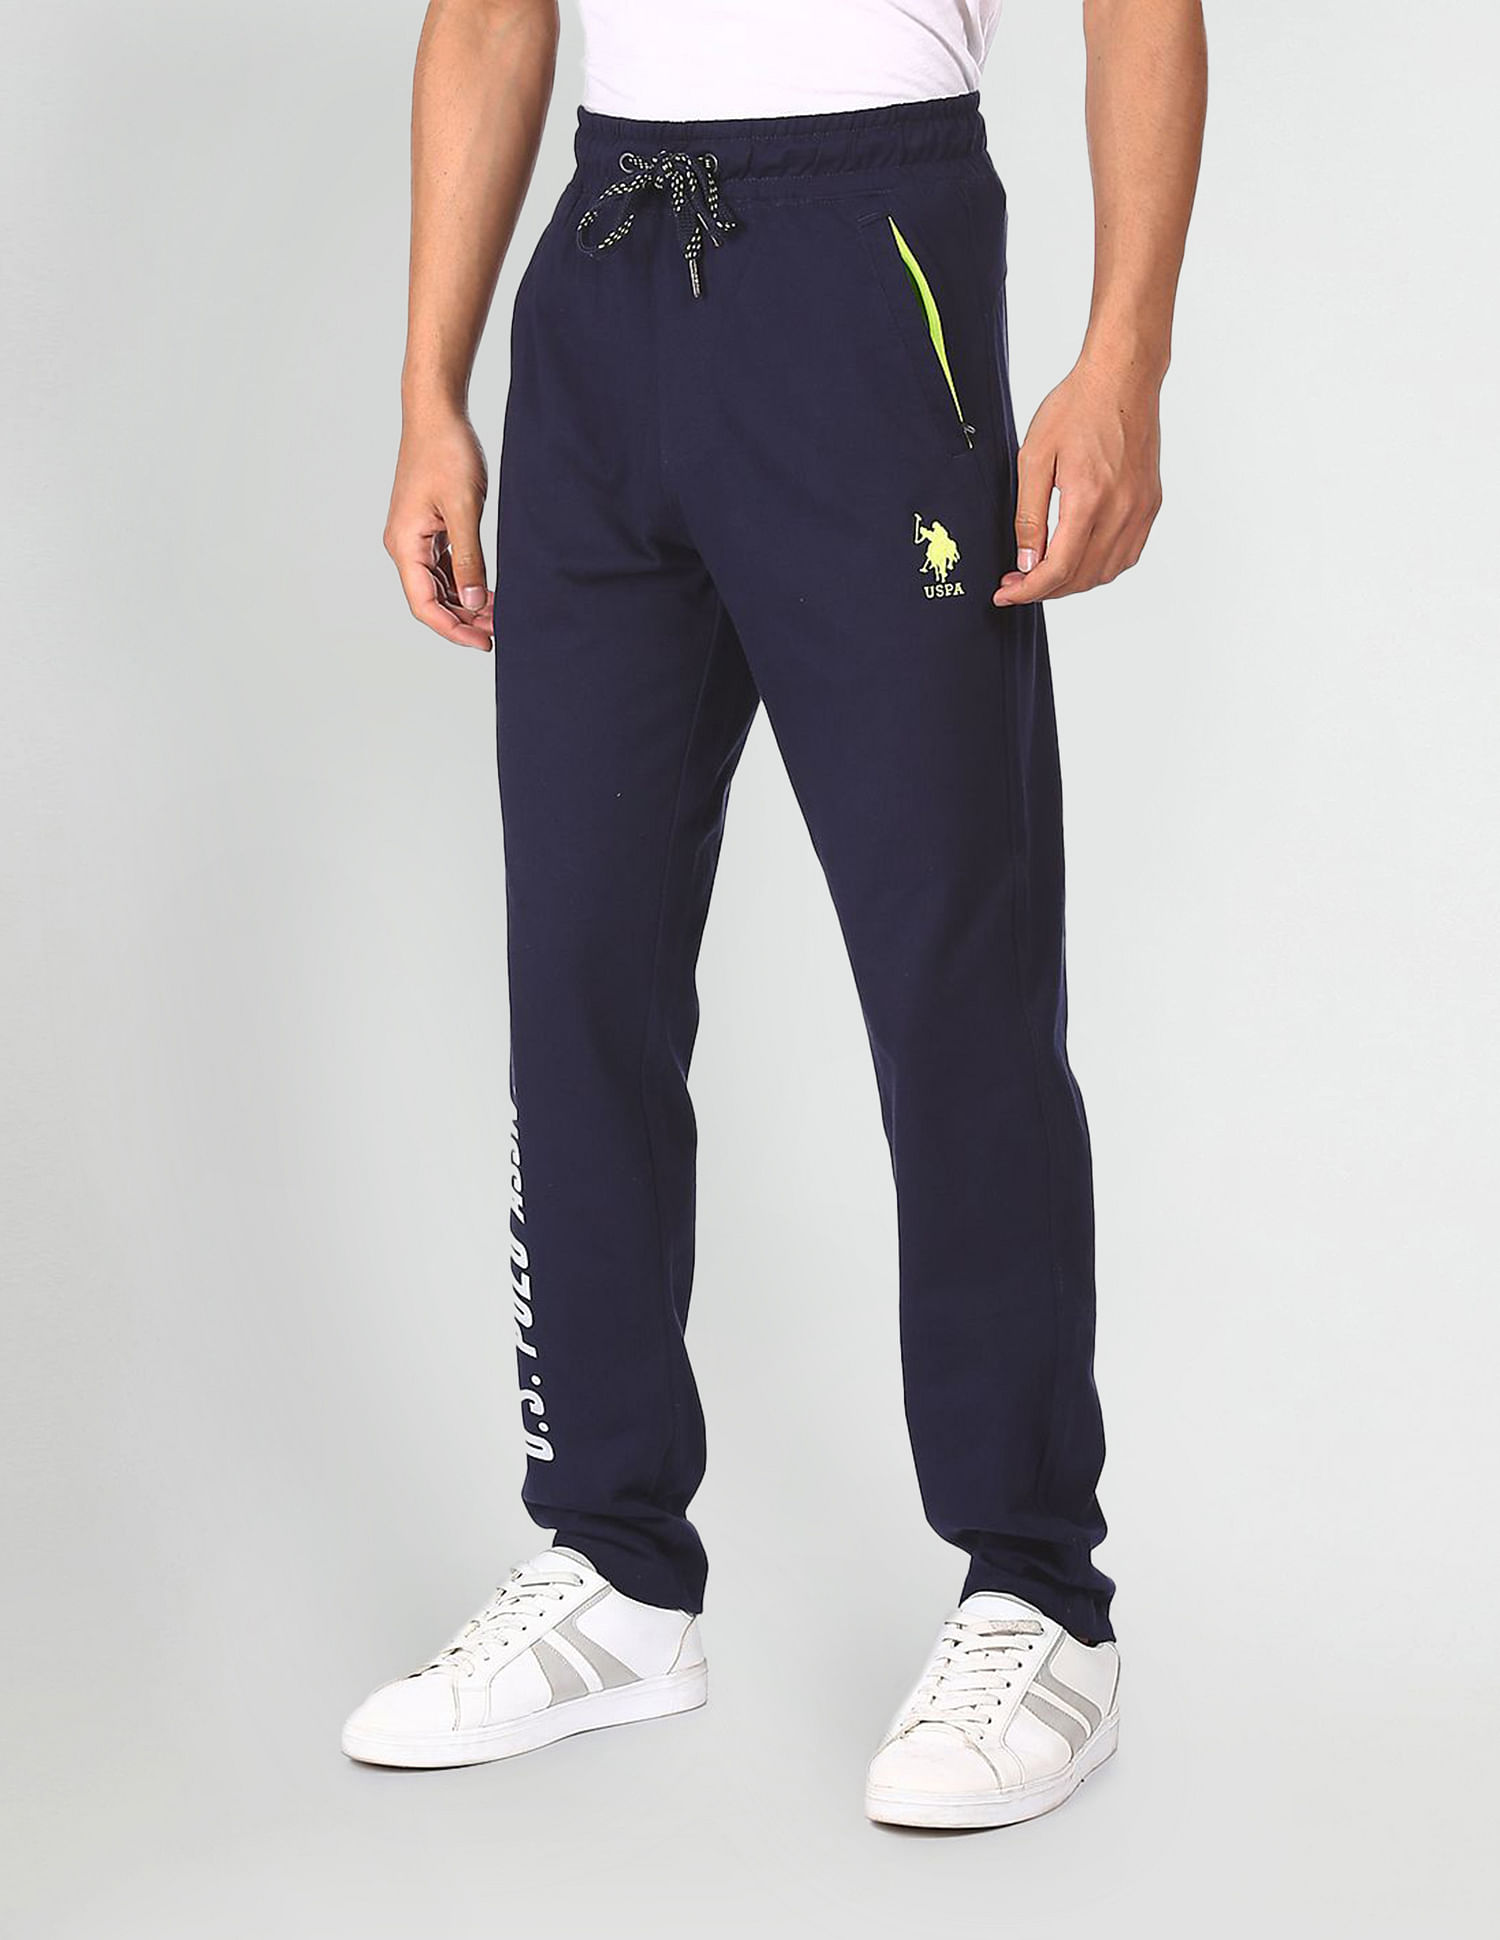 track pants for boys BRANDED LOWERS DRY FIT LOWERS BRANDED  JOGGERSATTRACTIVE LOWERS Track Pants